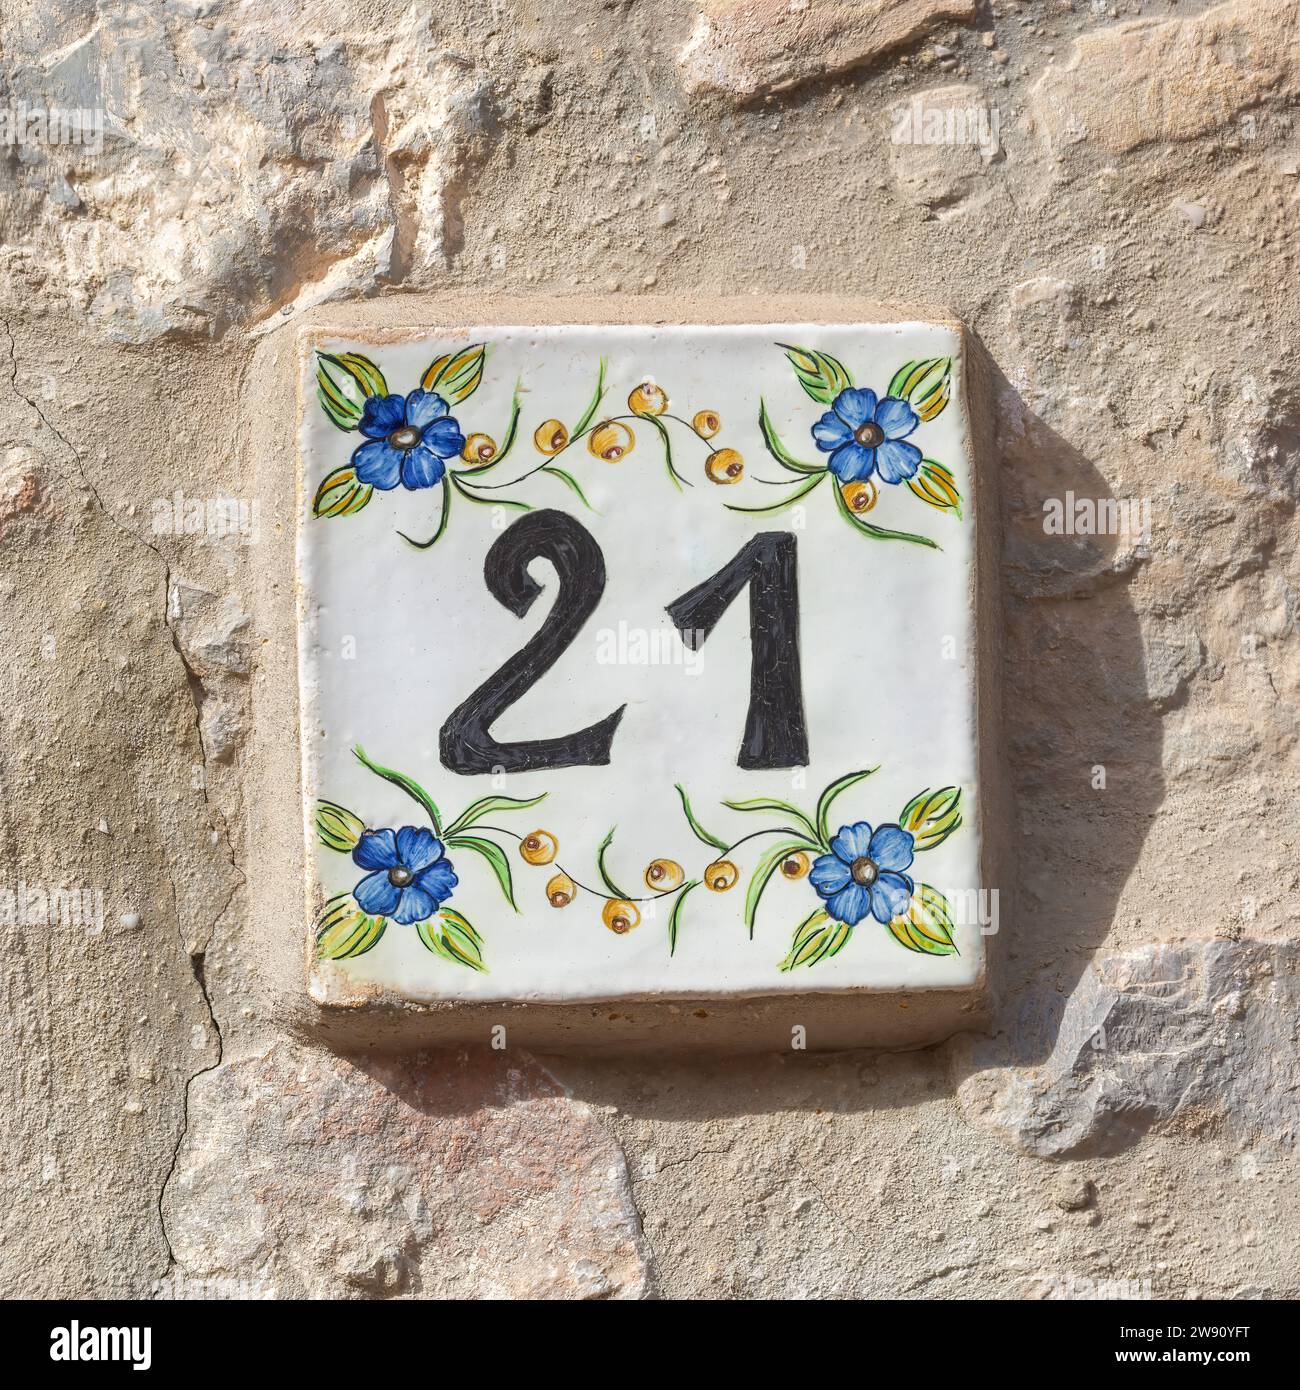 Number 21 House Tile on Wall Stock Photo